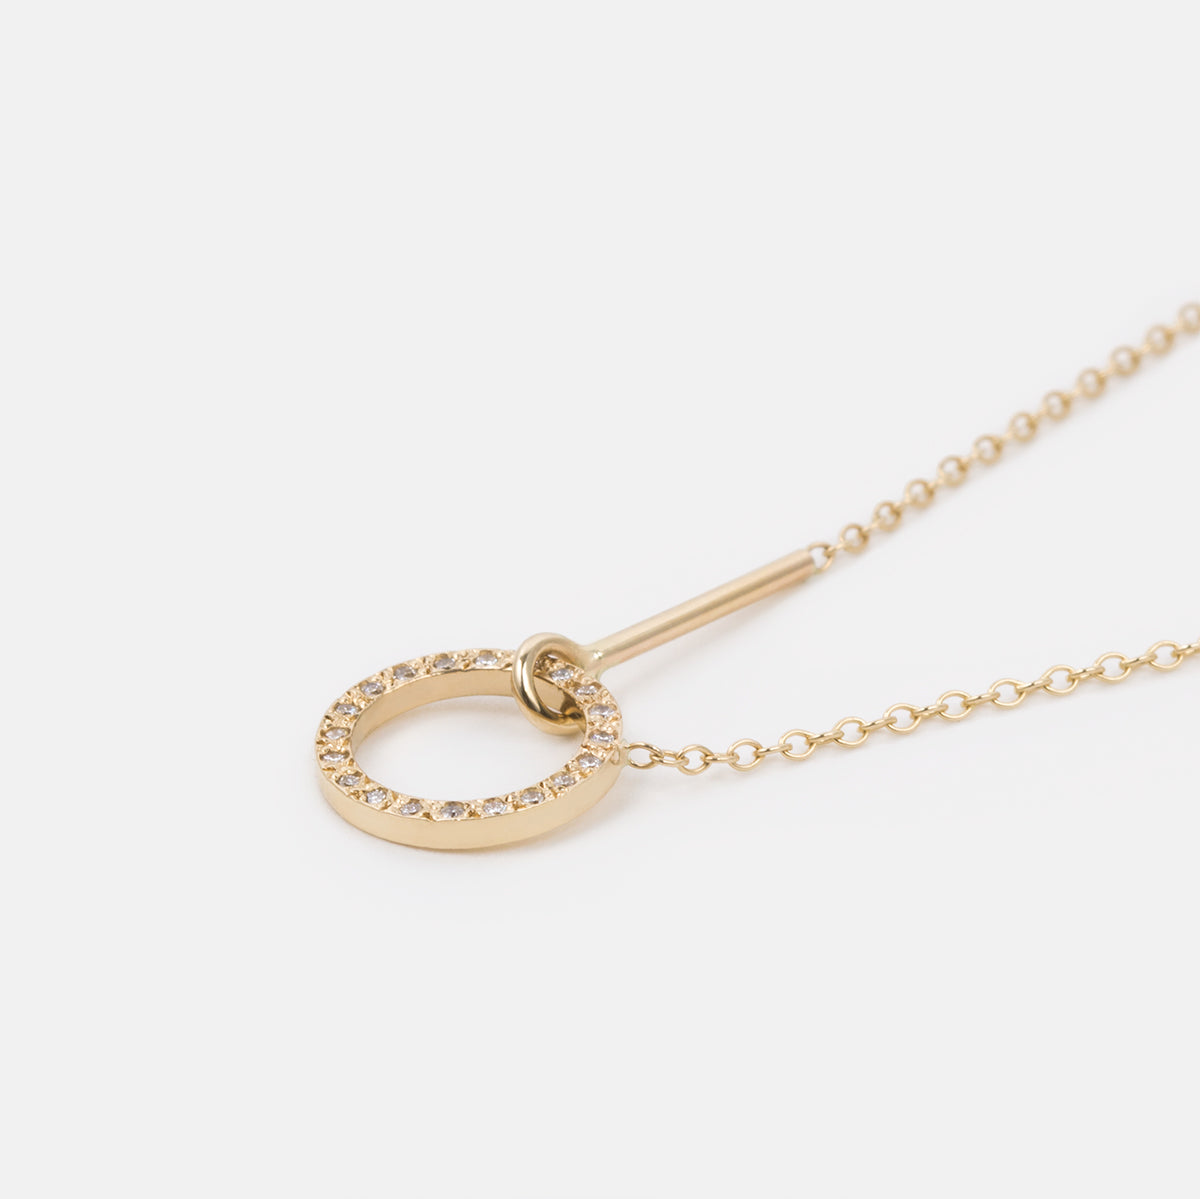 Visata Non-Traditional Necklace in 14k Gold set with White Diamonds By SHW Fine Jewelry NYC